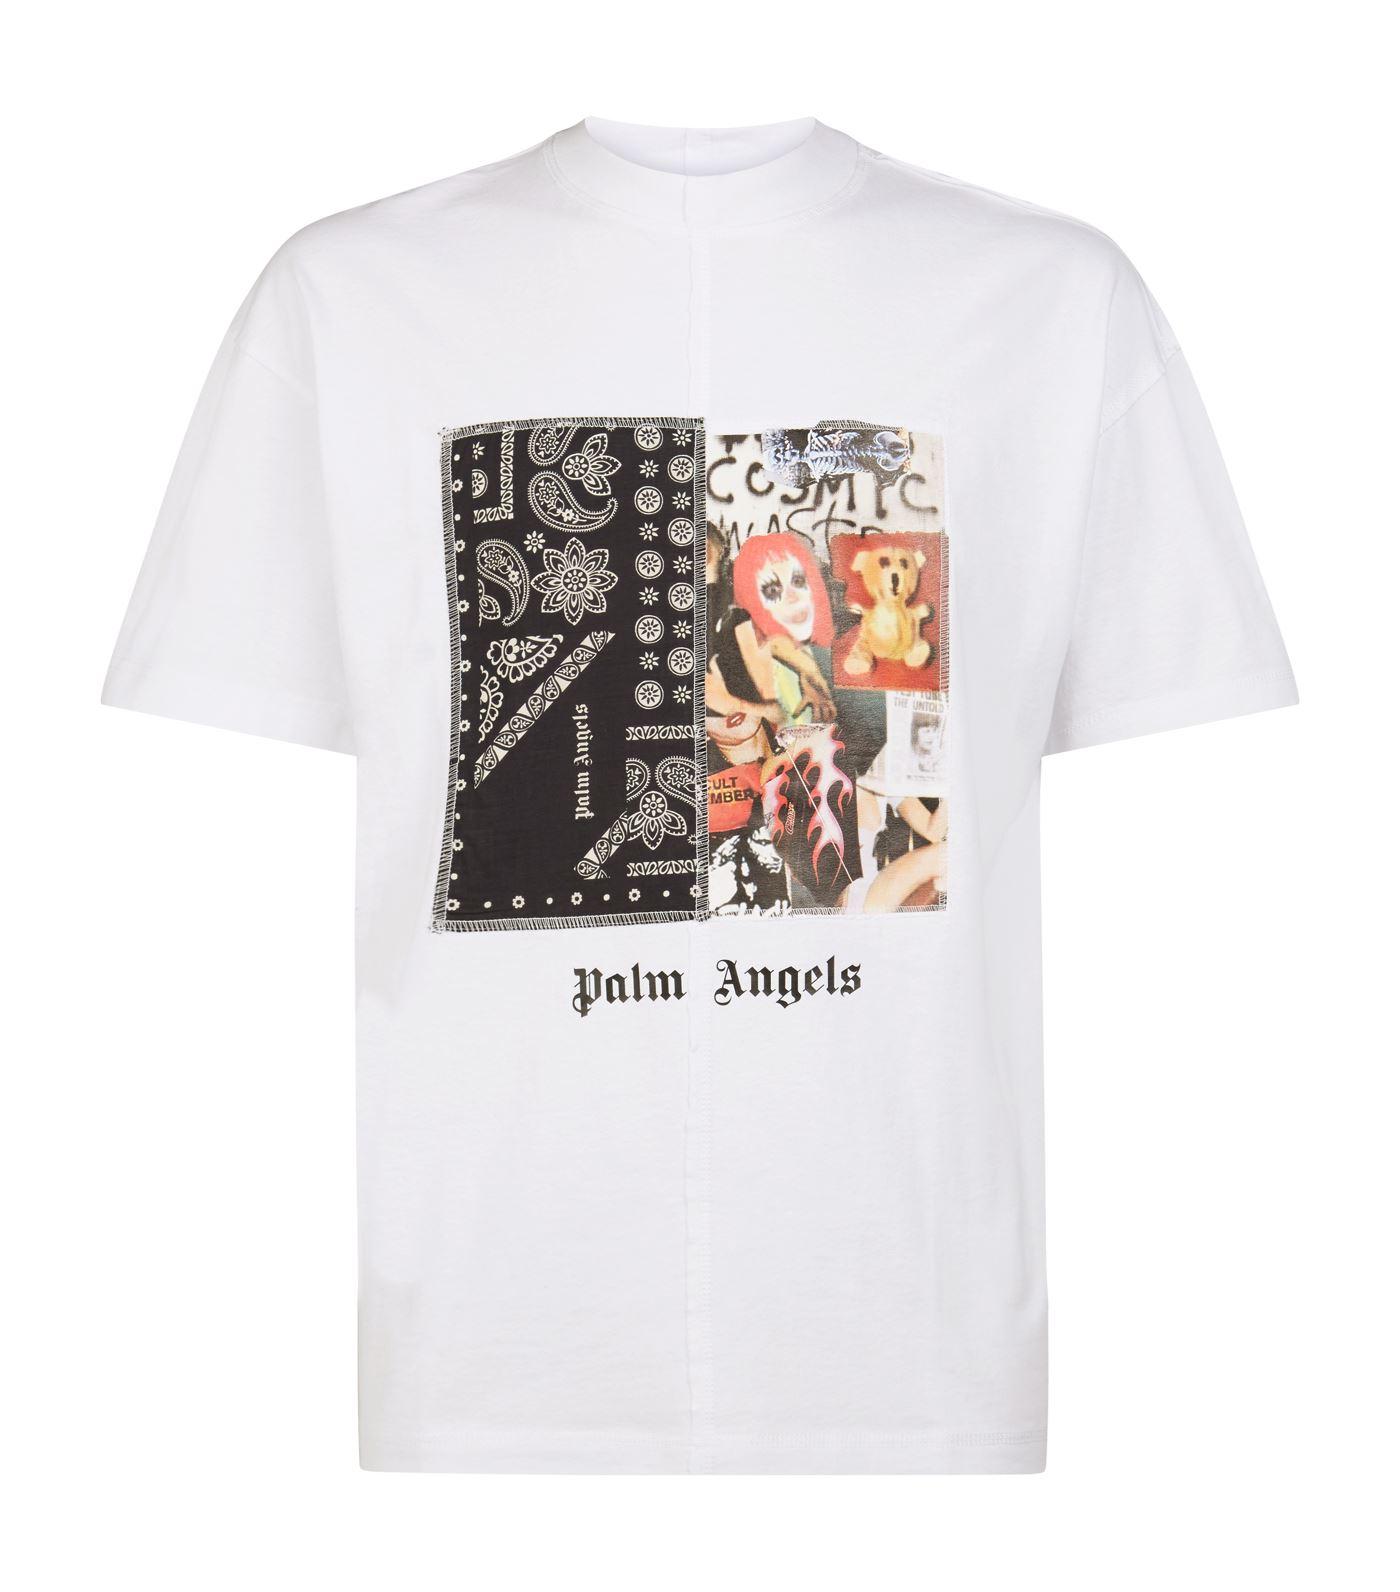 Palm Angels Bandana Collage T-shirt in White for Men - Save 38% - Lyst